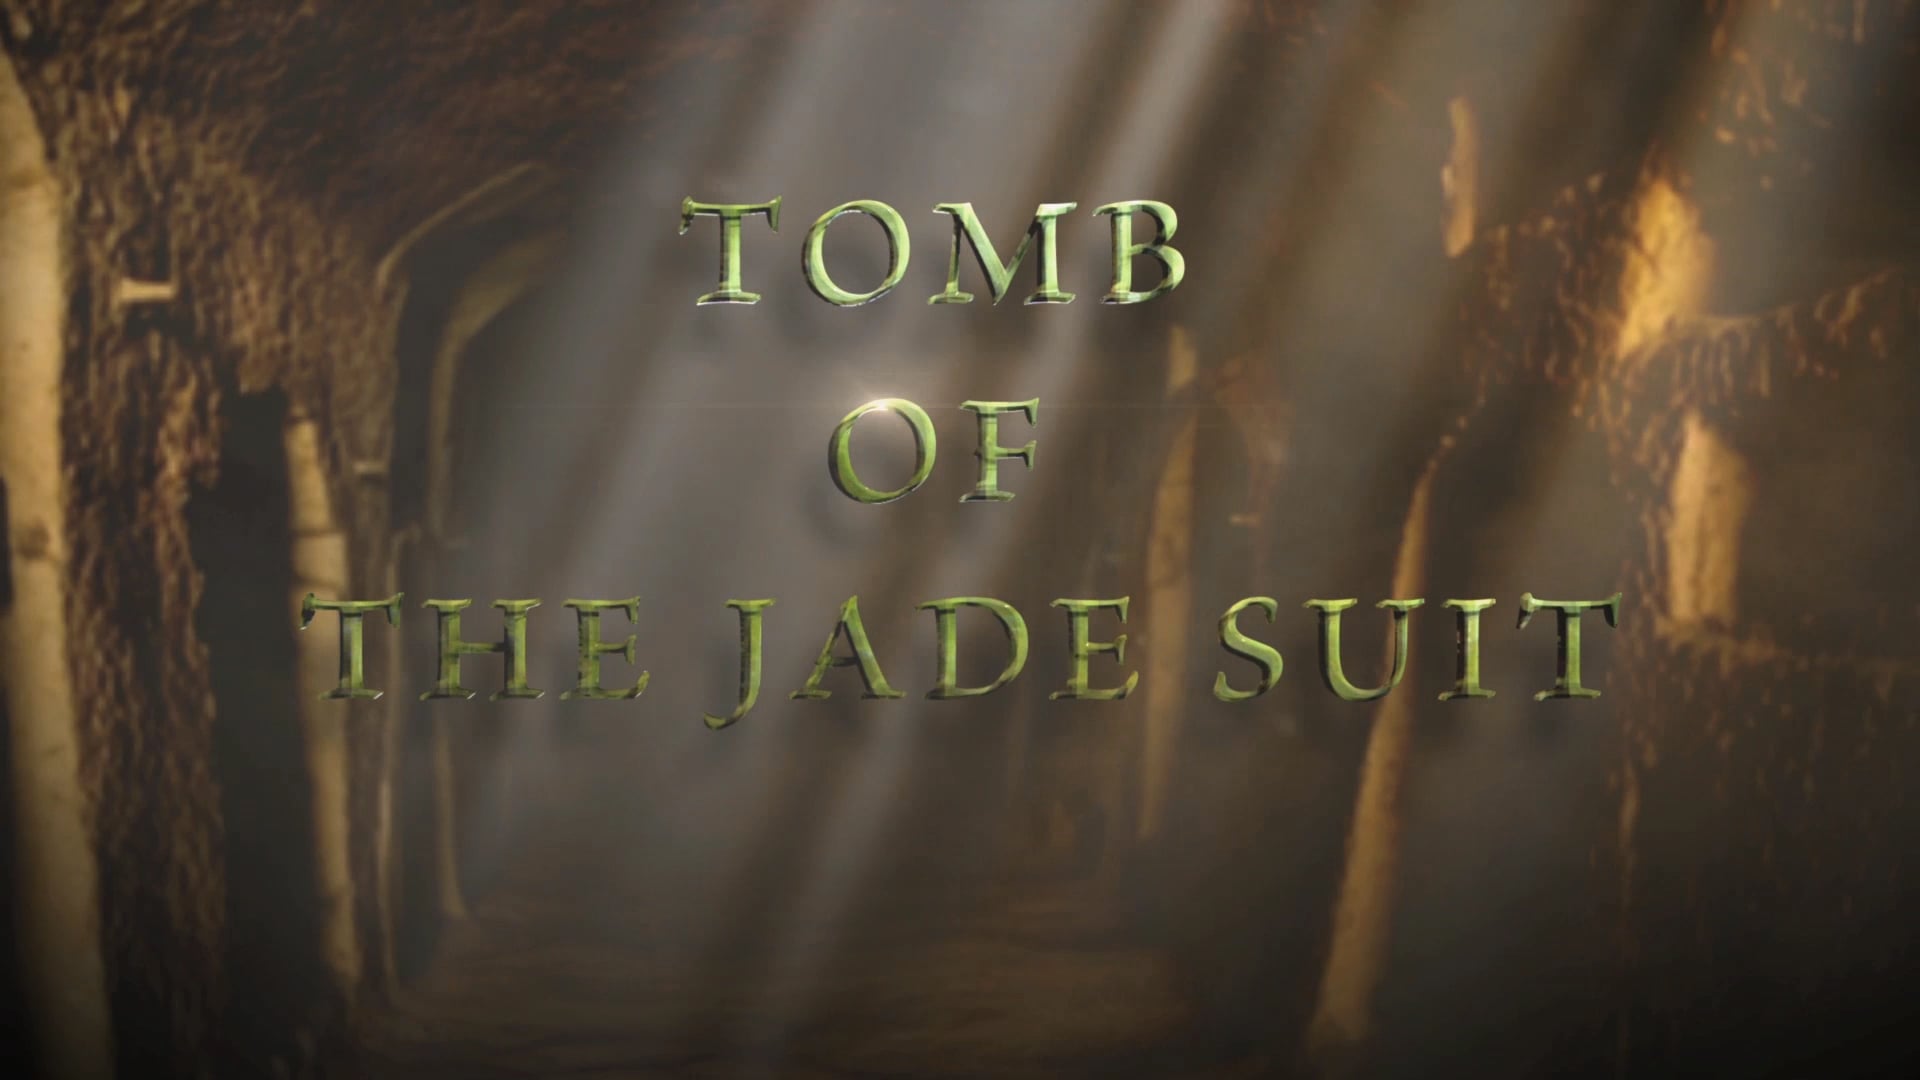 Mysteries of China — Tomb of Jade Suit